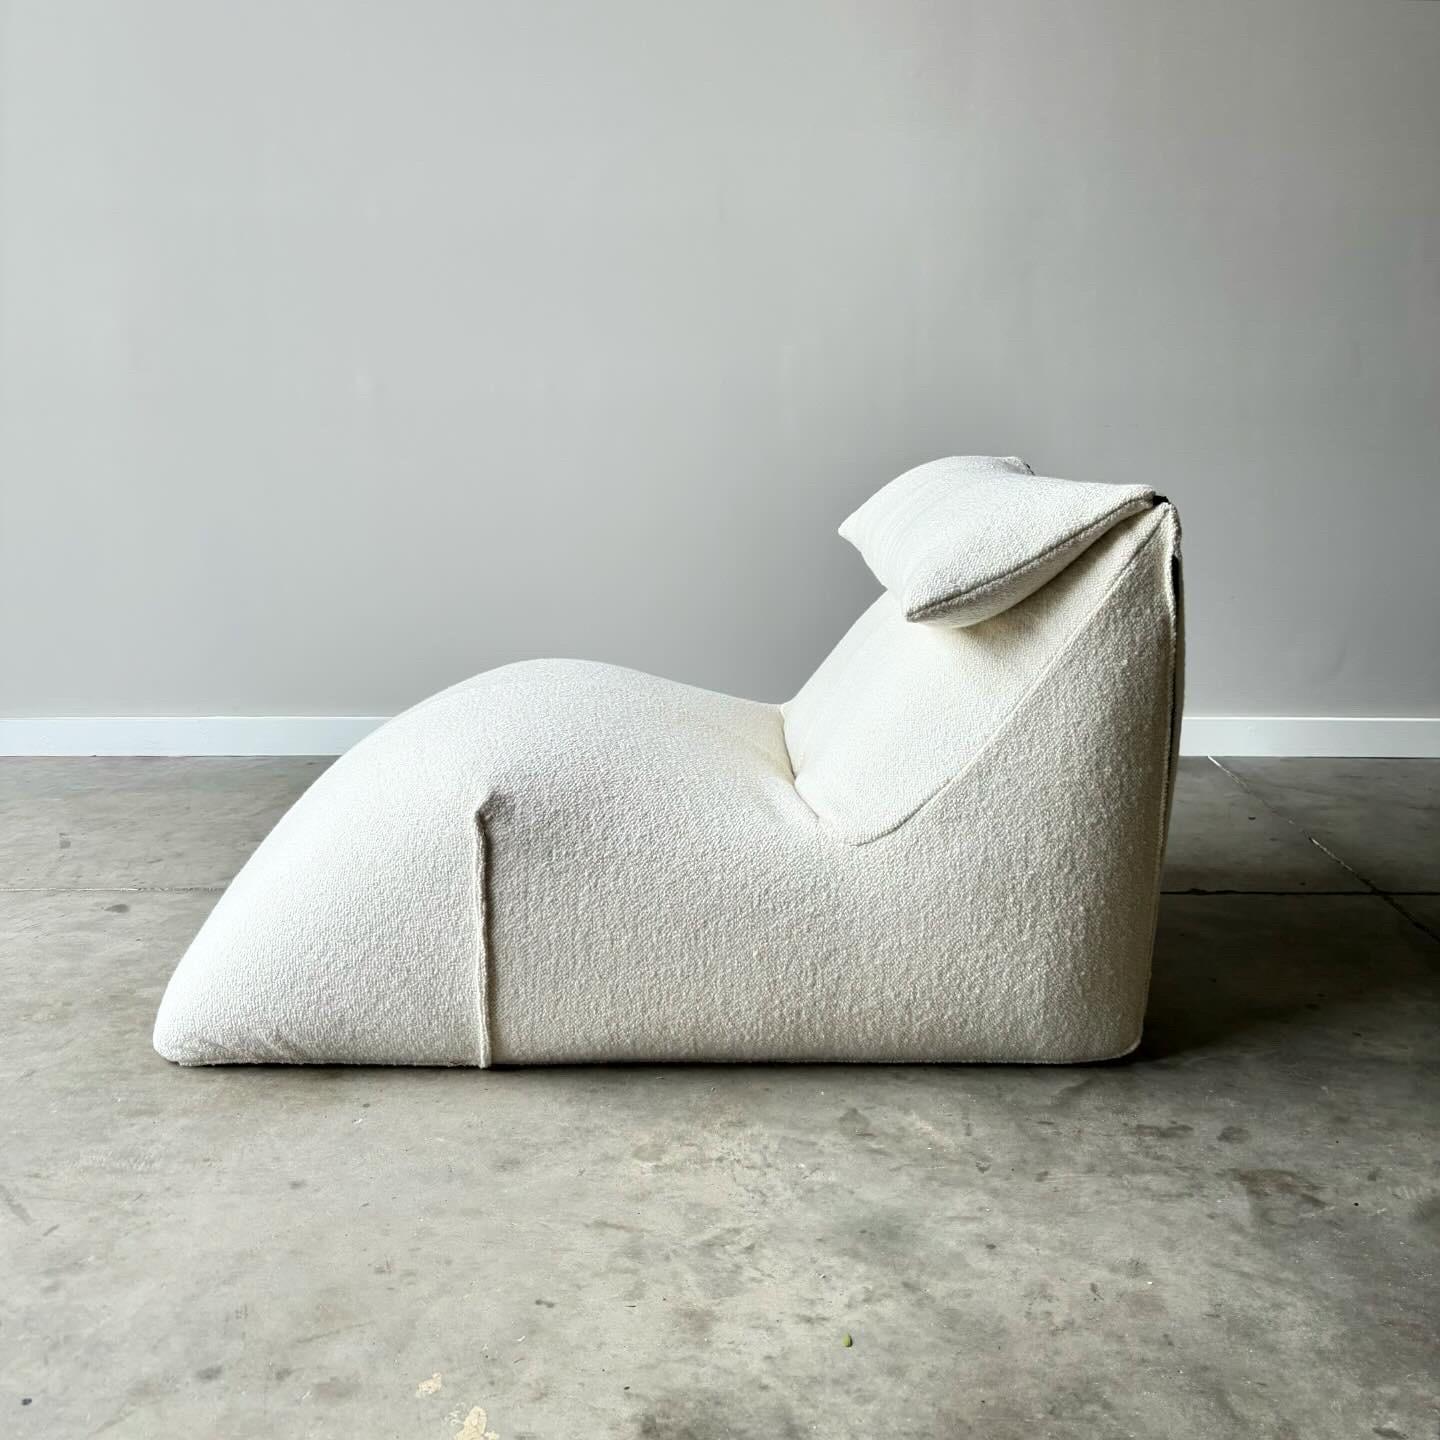 B&B Italia chaise lounge Le Bambole
1972 design by Mario Bellini
Italian chaise made of heavy foam and newly upholstered in ivory boucle. 
A great design from the 1970s. 